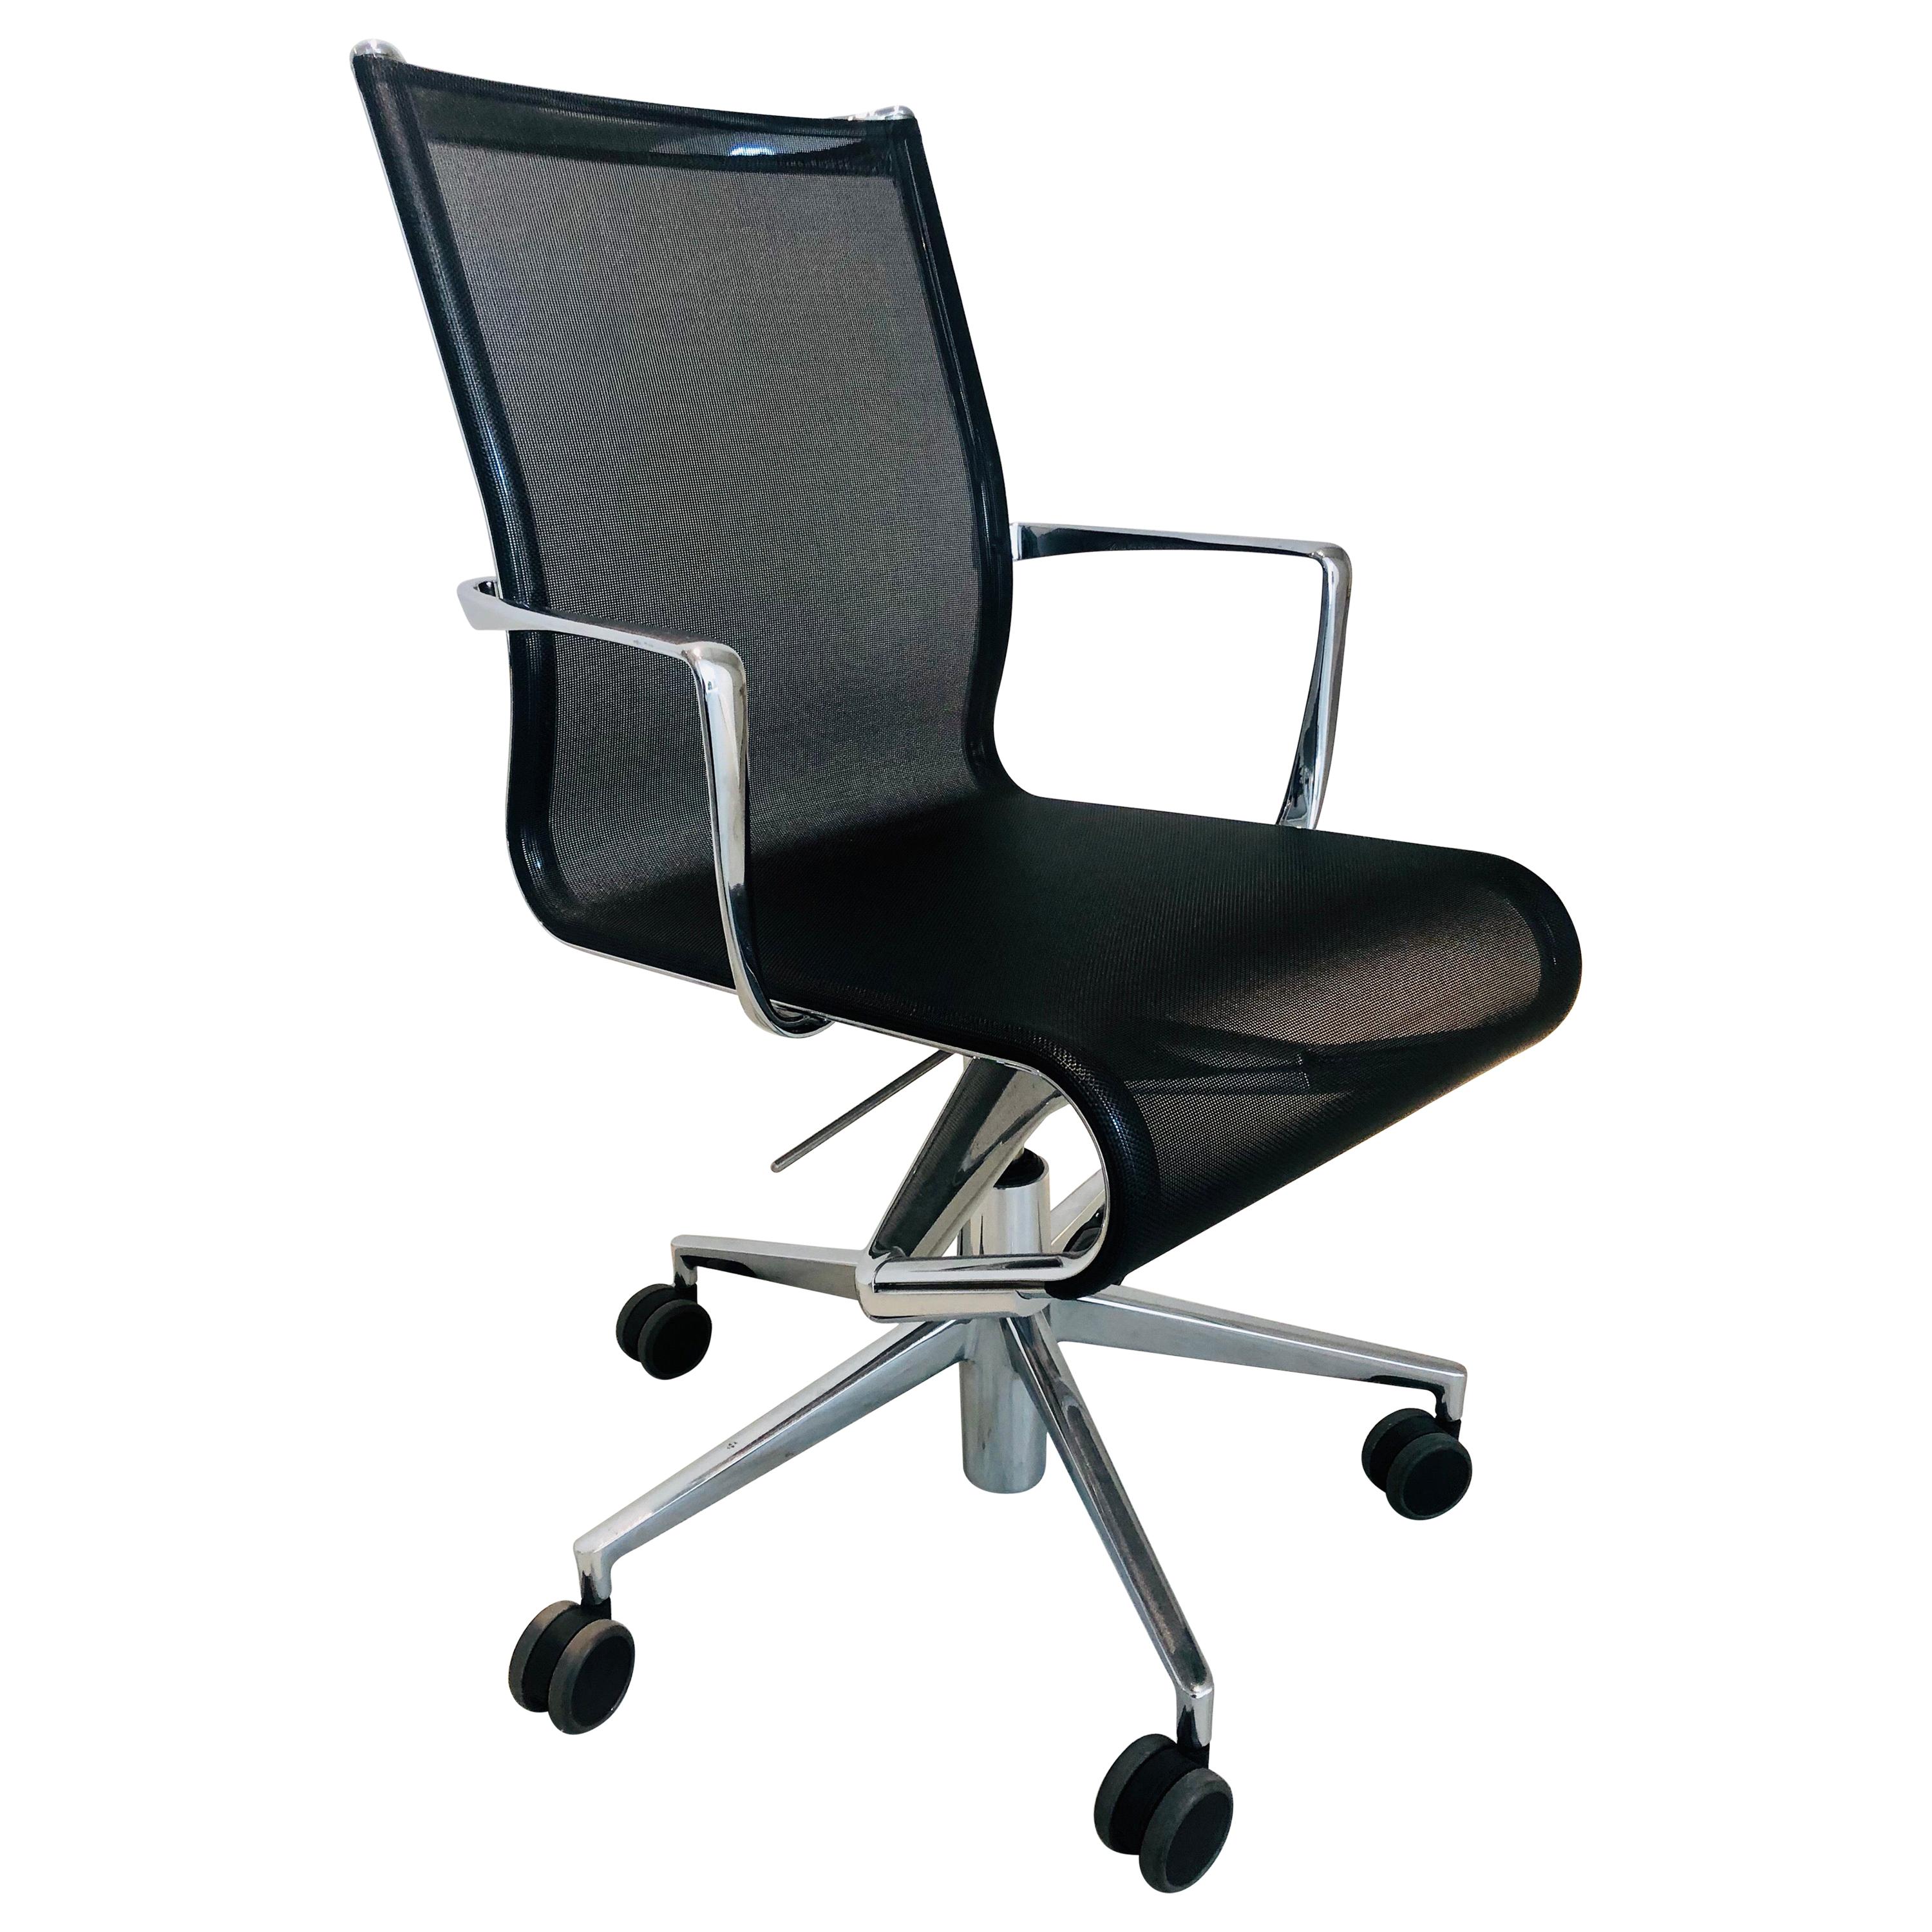 Modern Black Office Chair - Rolling Swivel with Arms by Alberto Meda - Alias